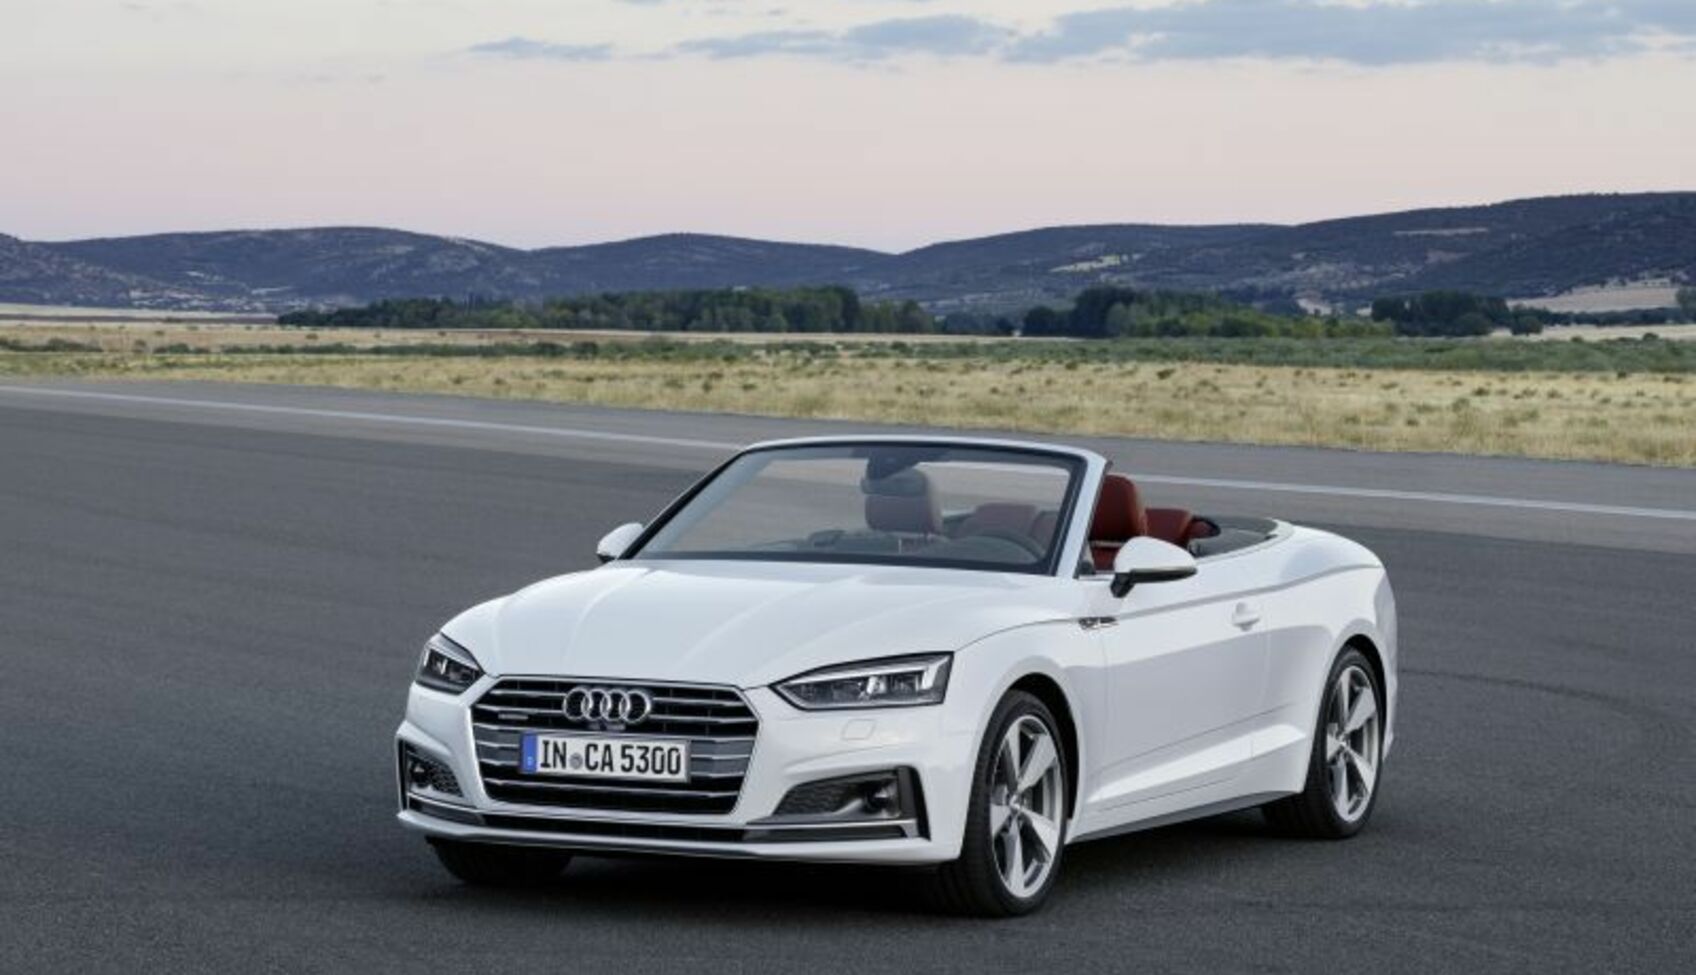 Audi A5 Cabriolet (F5) 45 TFSI (245 Hp) S tronic 2019